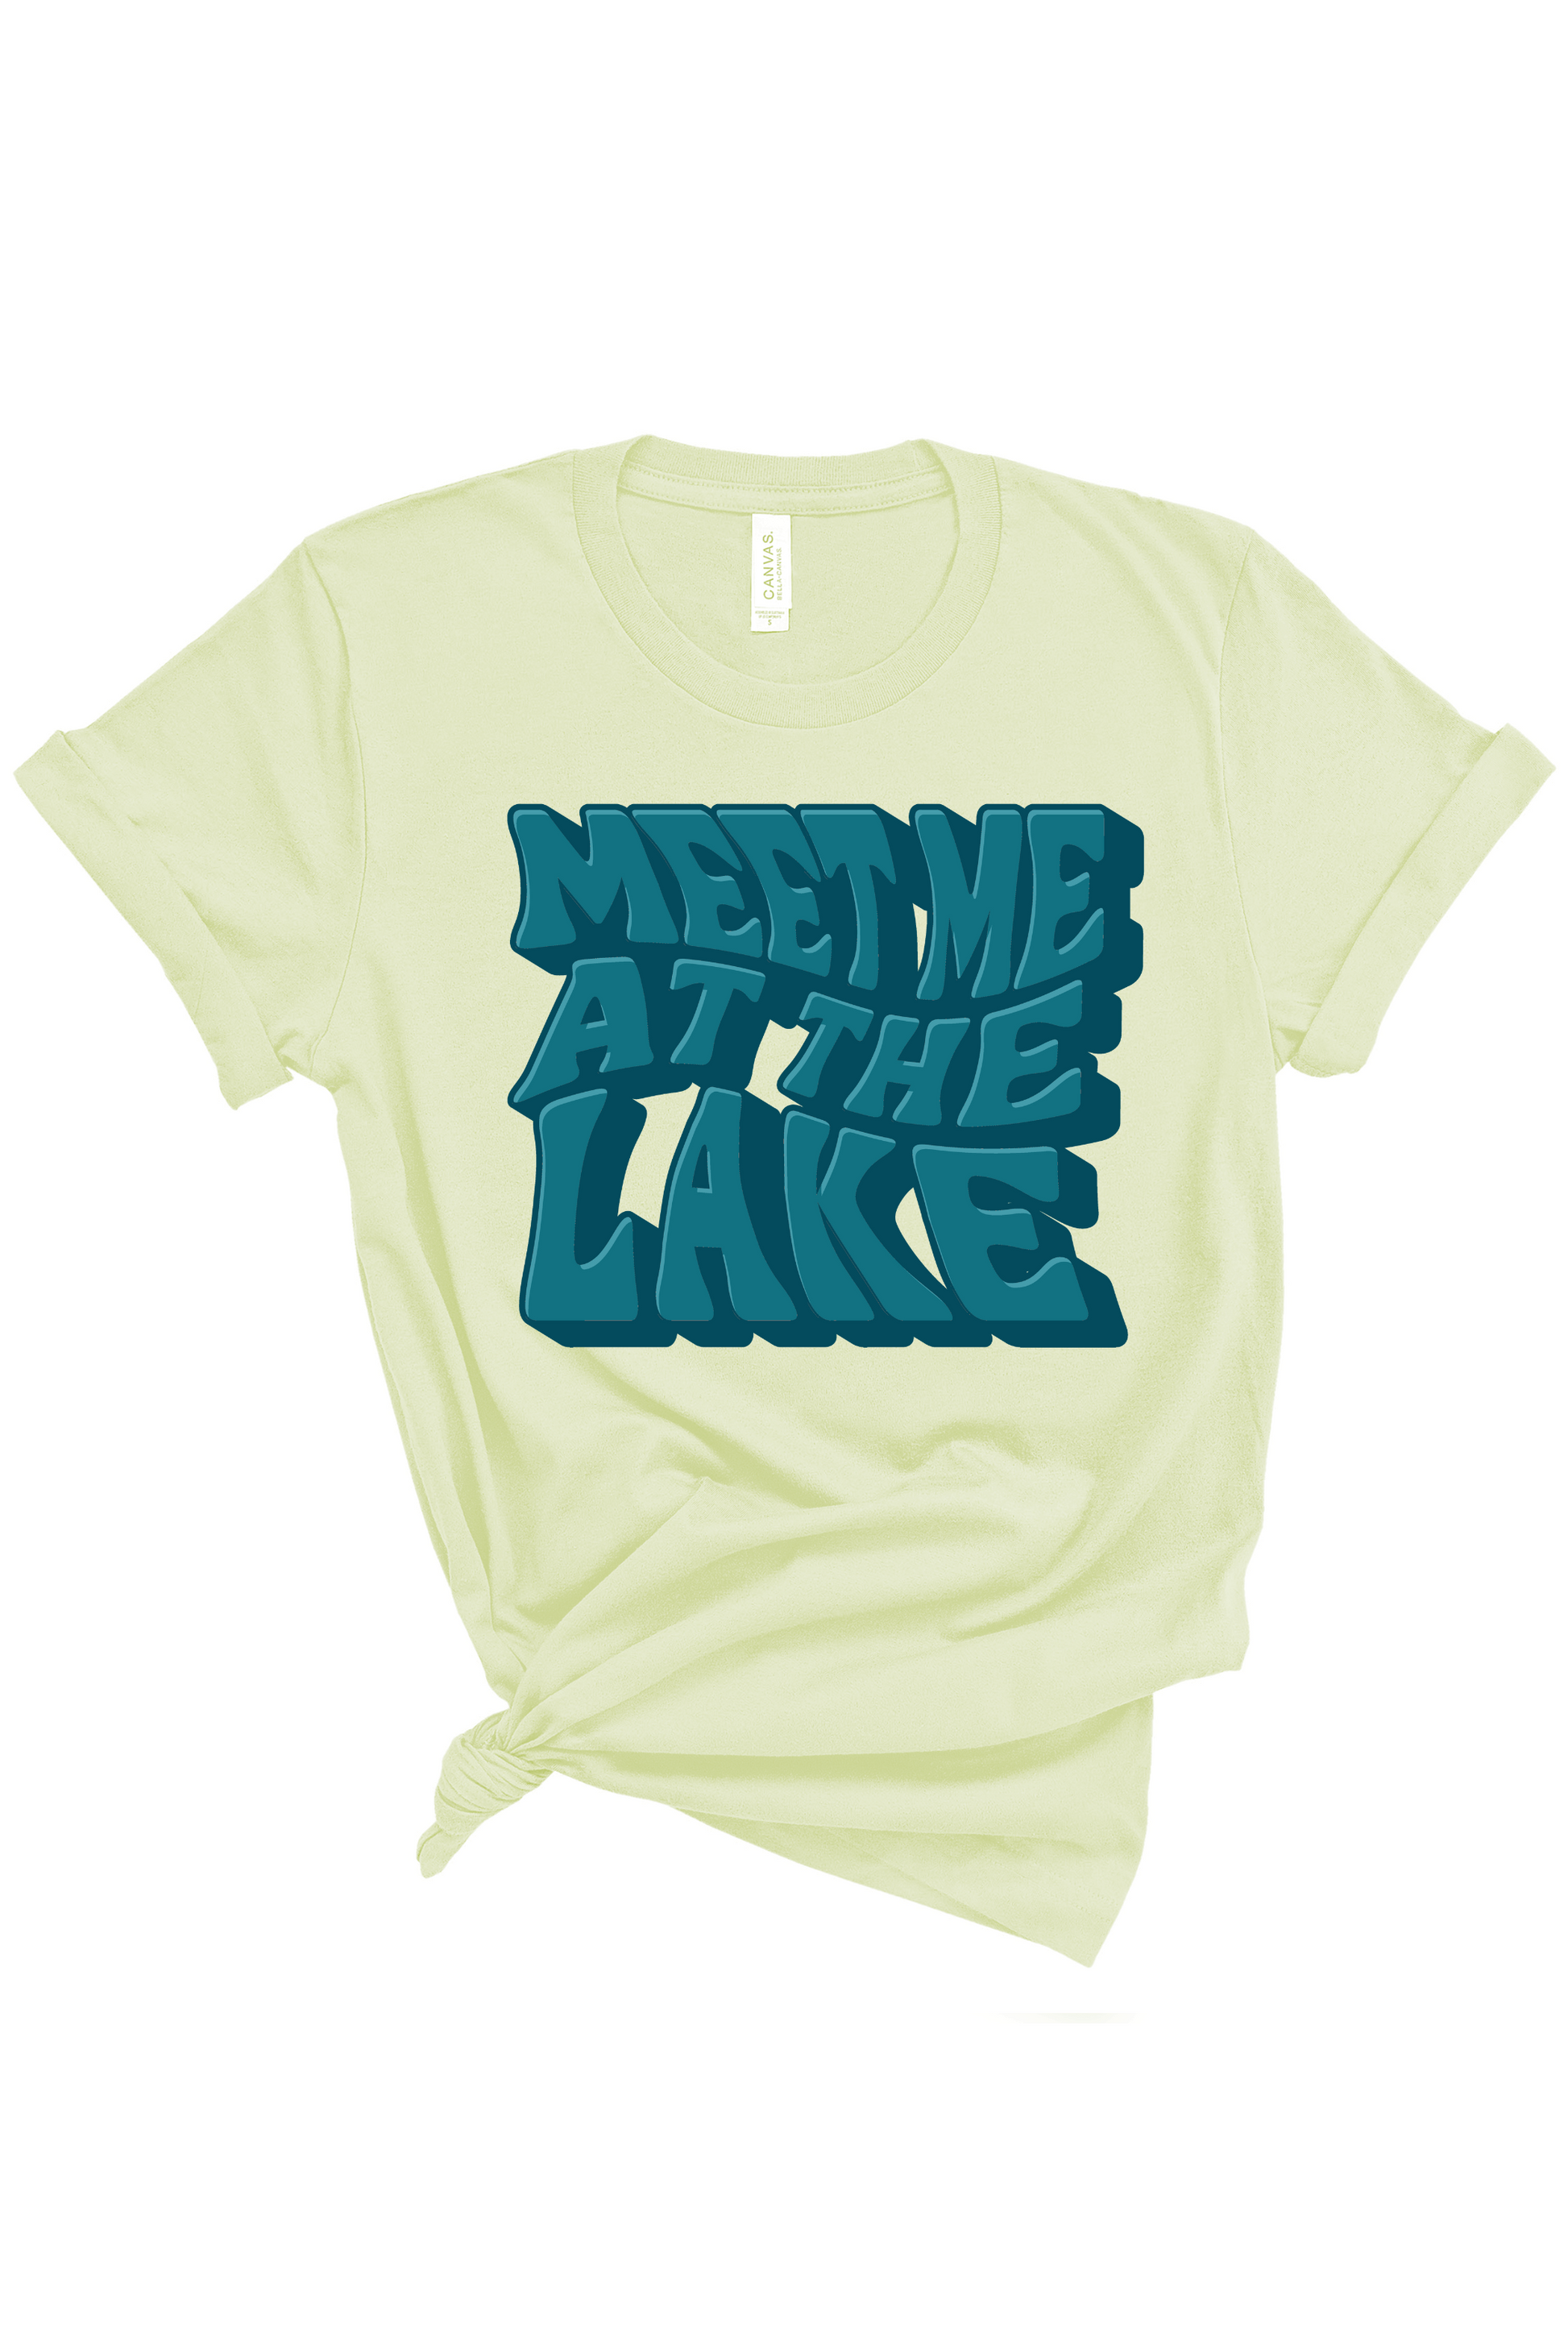 Meet Me At The Lake | Adult Tee-Sister Shirts-Sister Shirts, Cute & Custom Tees for Mama & Littles in Trussville, Alabama.